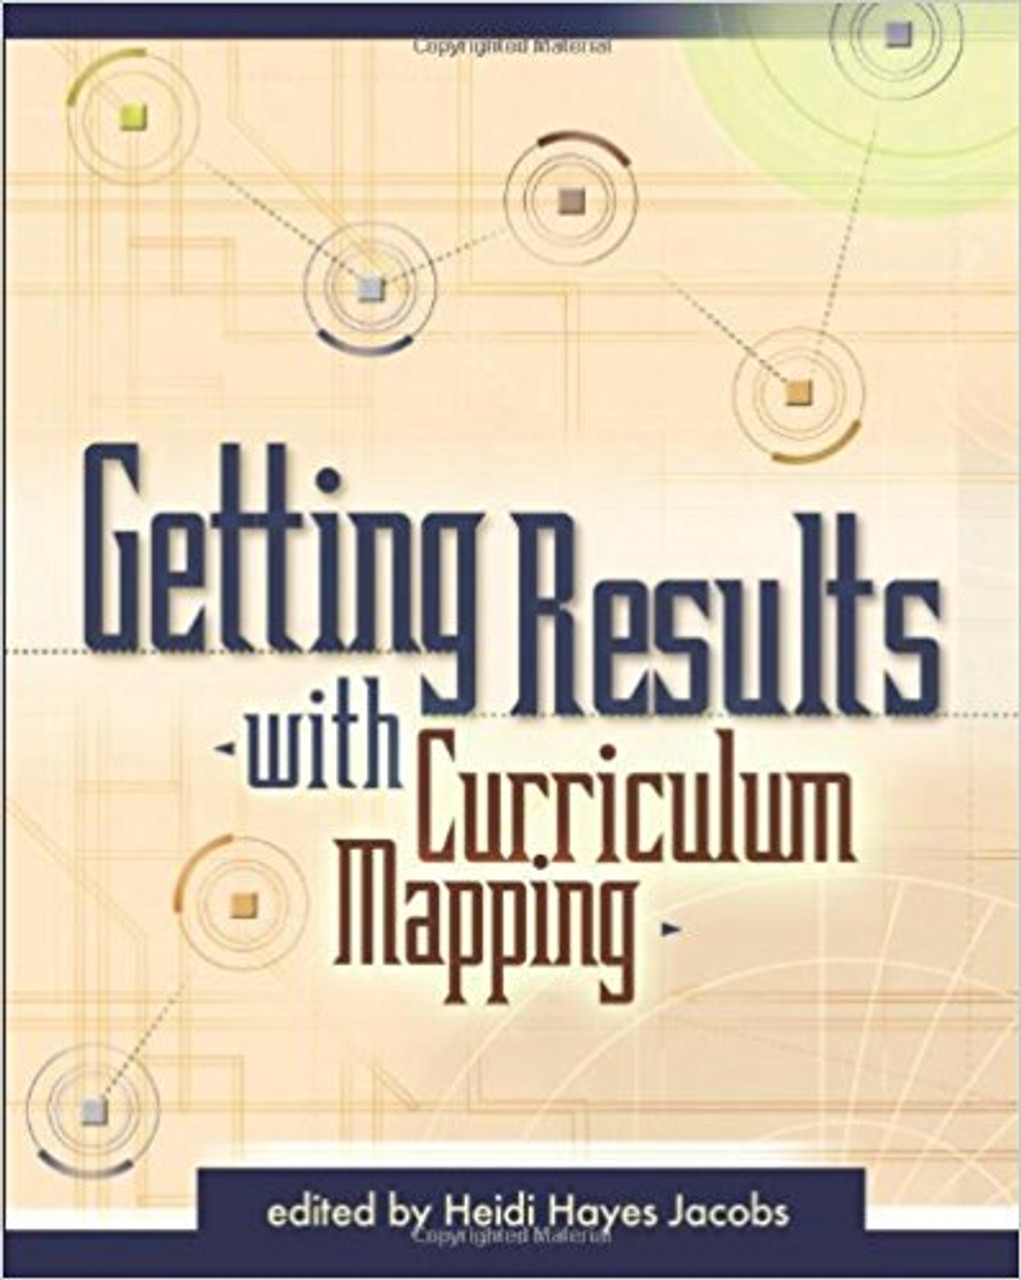 Curriculum maps are among the simplest yet most effective tools for improving teaching and learning. Because they require people to draw explicit connections between content, skills, and assessment measures, these maps help ensure that all aspects of a lesson are aligned not only with each other, but also with mandated standards and tests.